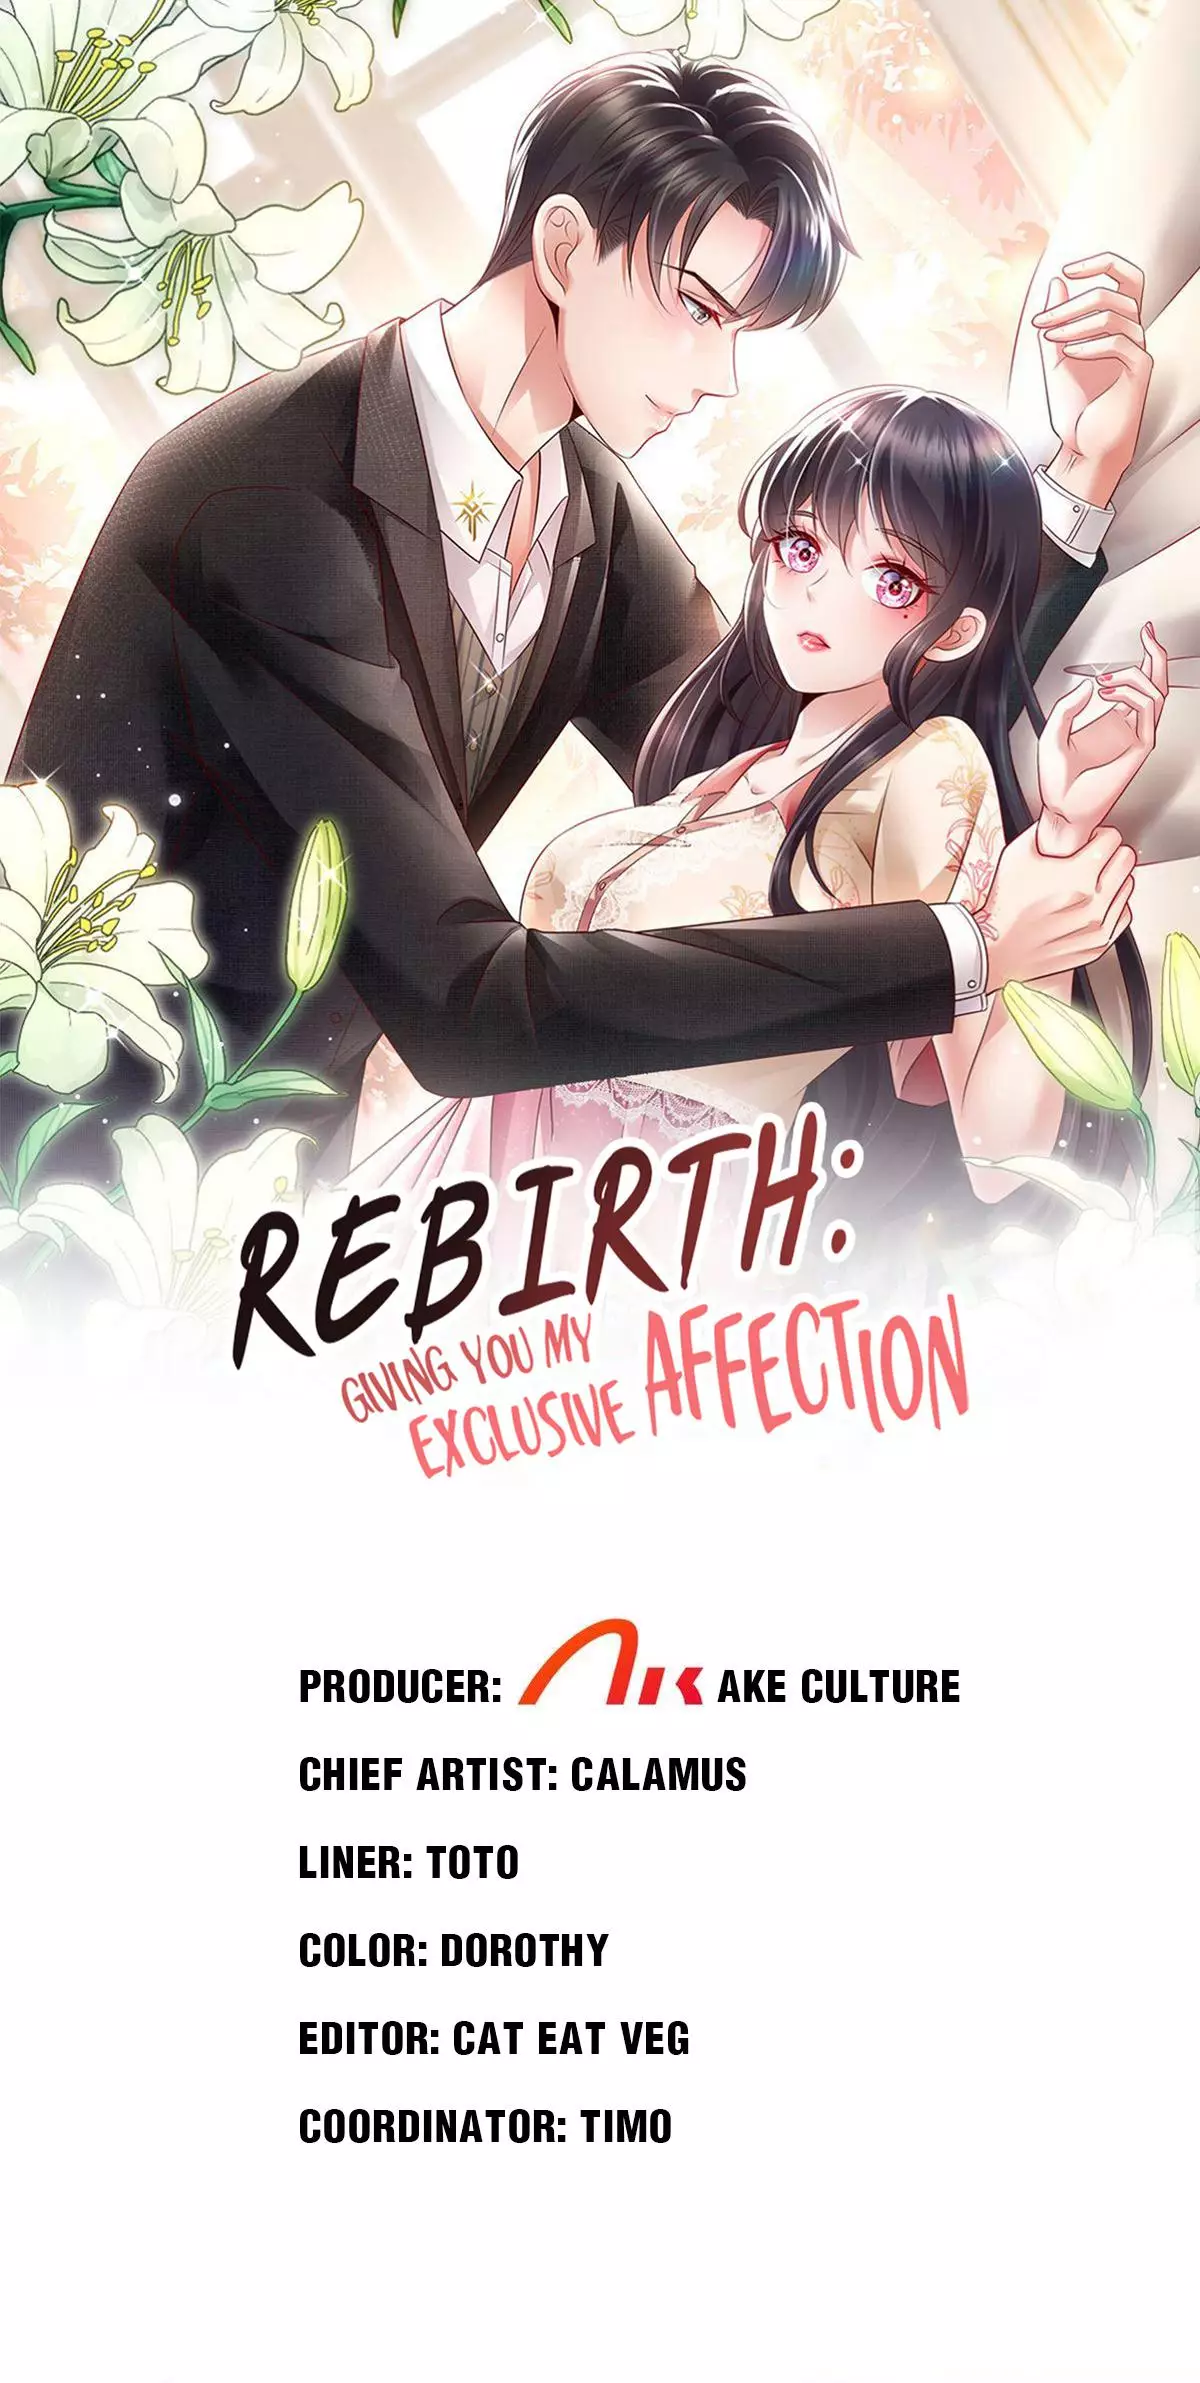 Rebirth: Giving You My Exclusive Affection - 92 page 1-1c778976